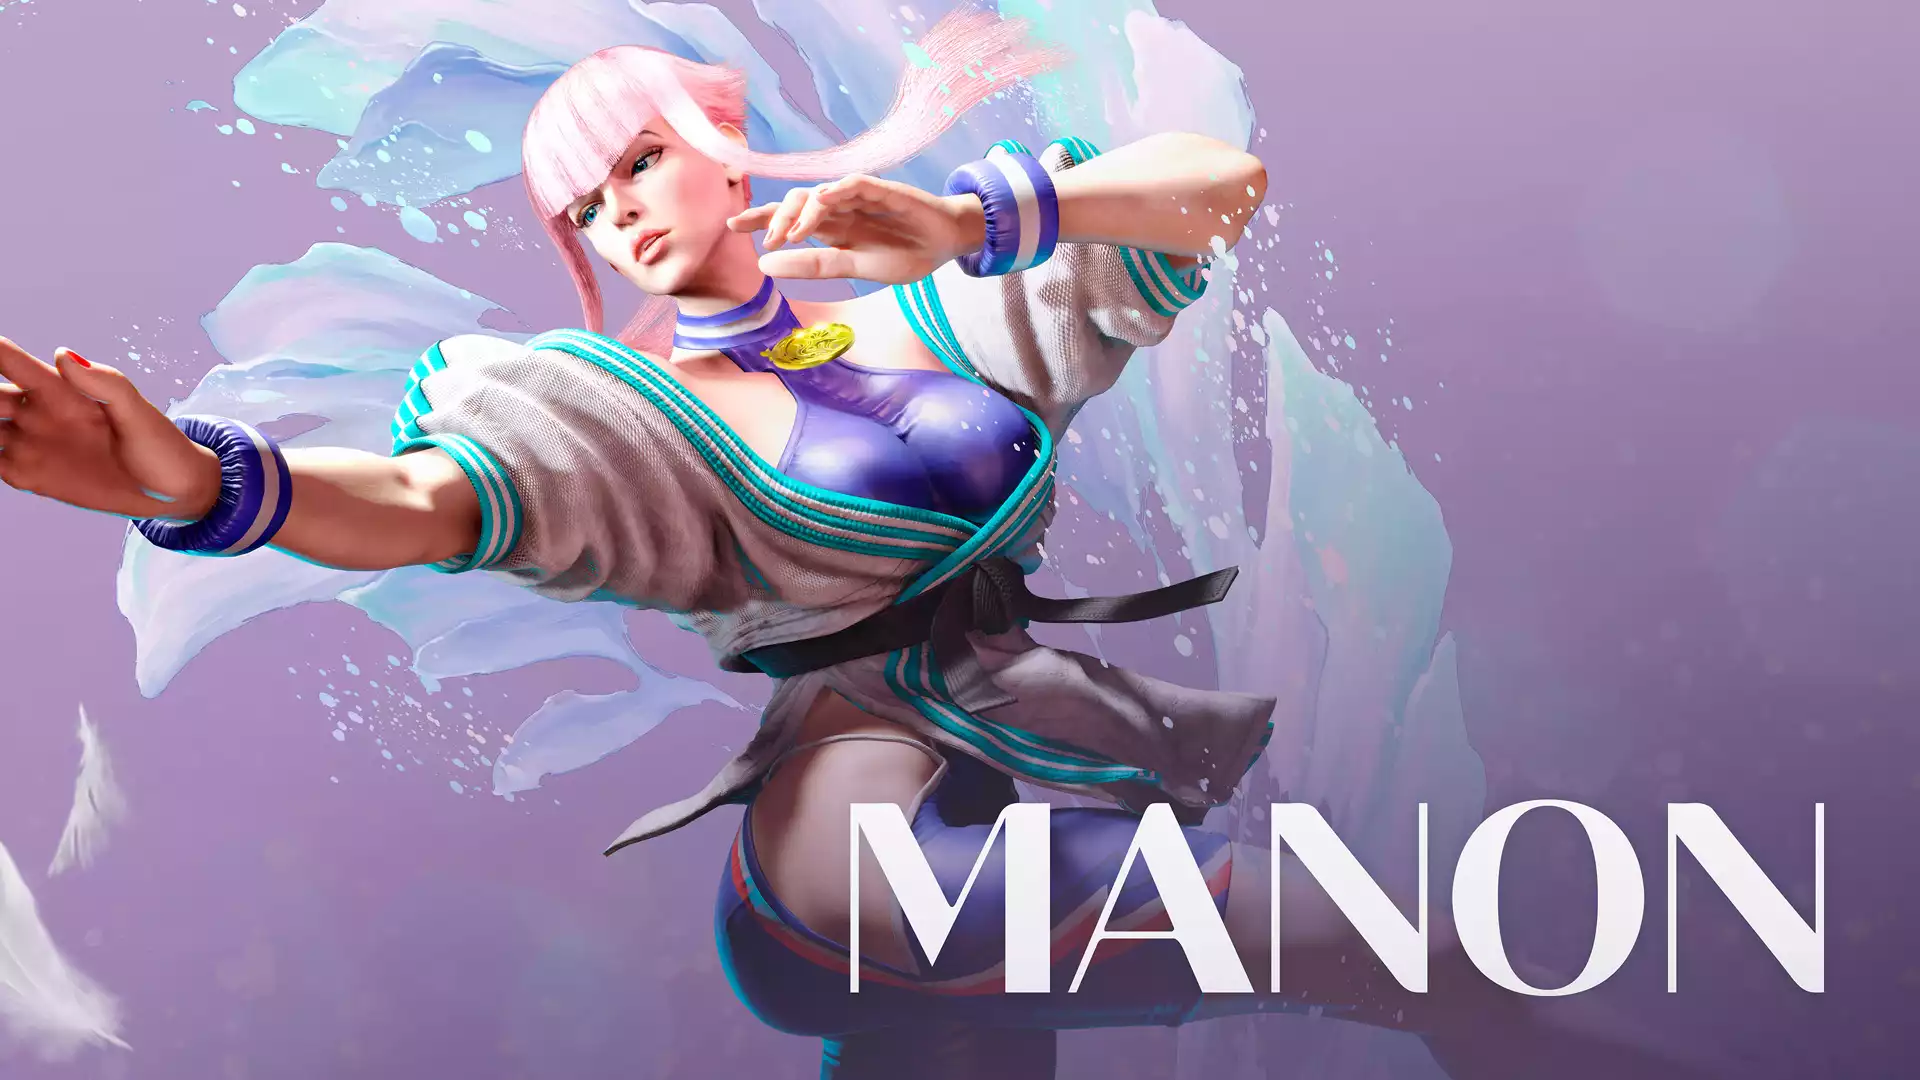 Here's how you play Manon in Street Fighter 6